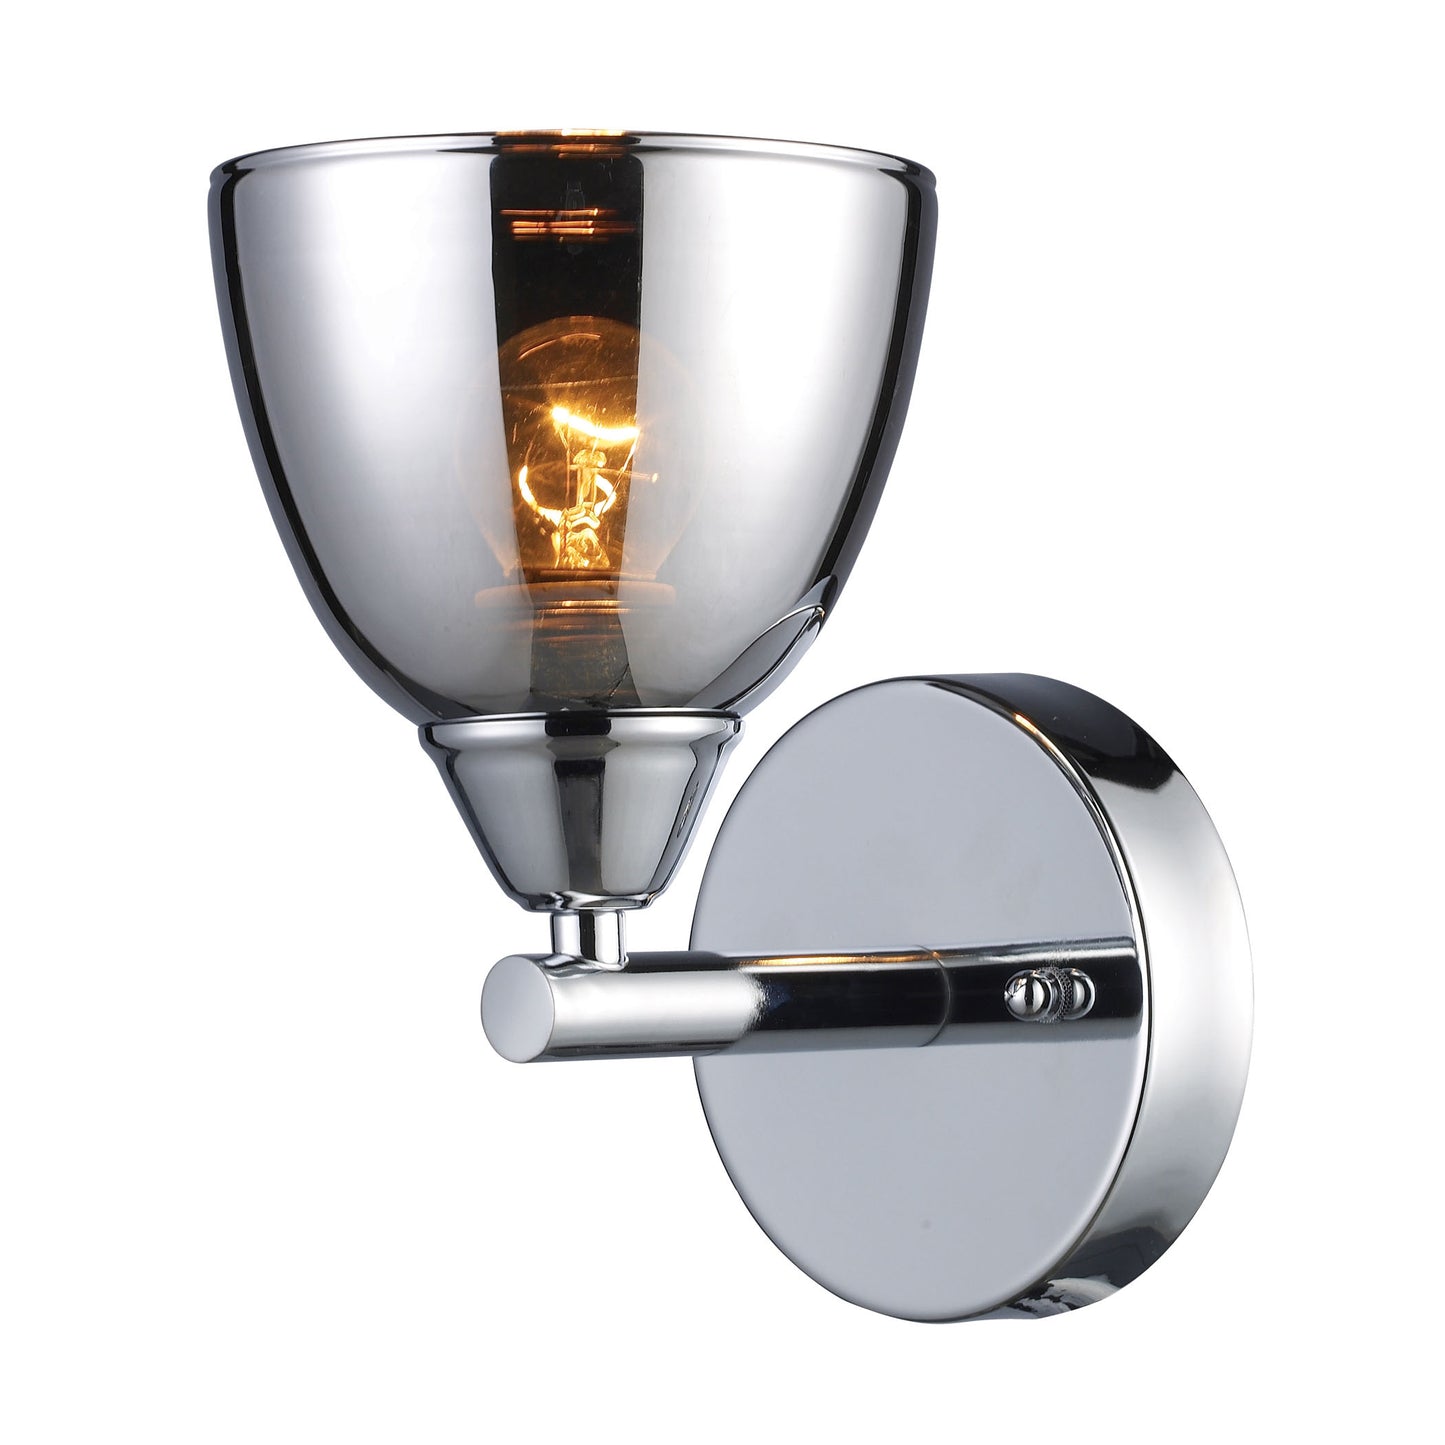 Reflections 1-Light Wall Lamp in Polished Chrome with Chrome-plated Glass